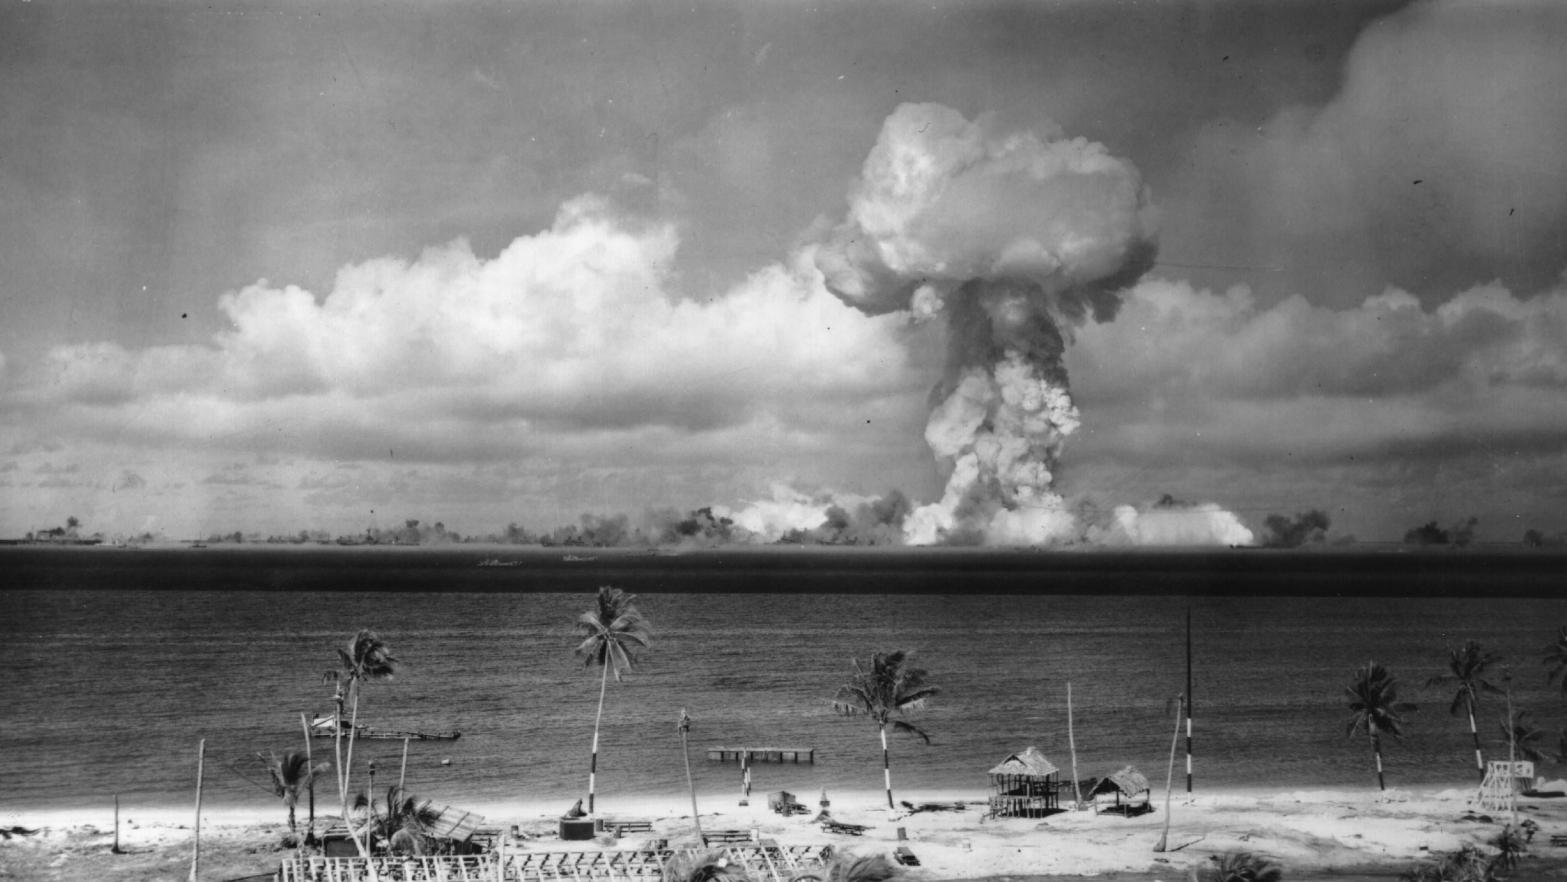 Some of the first nuclear bombs were tested off the coast of the Bikini Atoll in July 1946. (Image: Keystone, Getty Images)